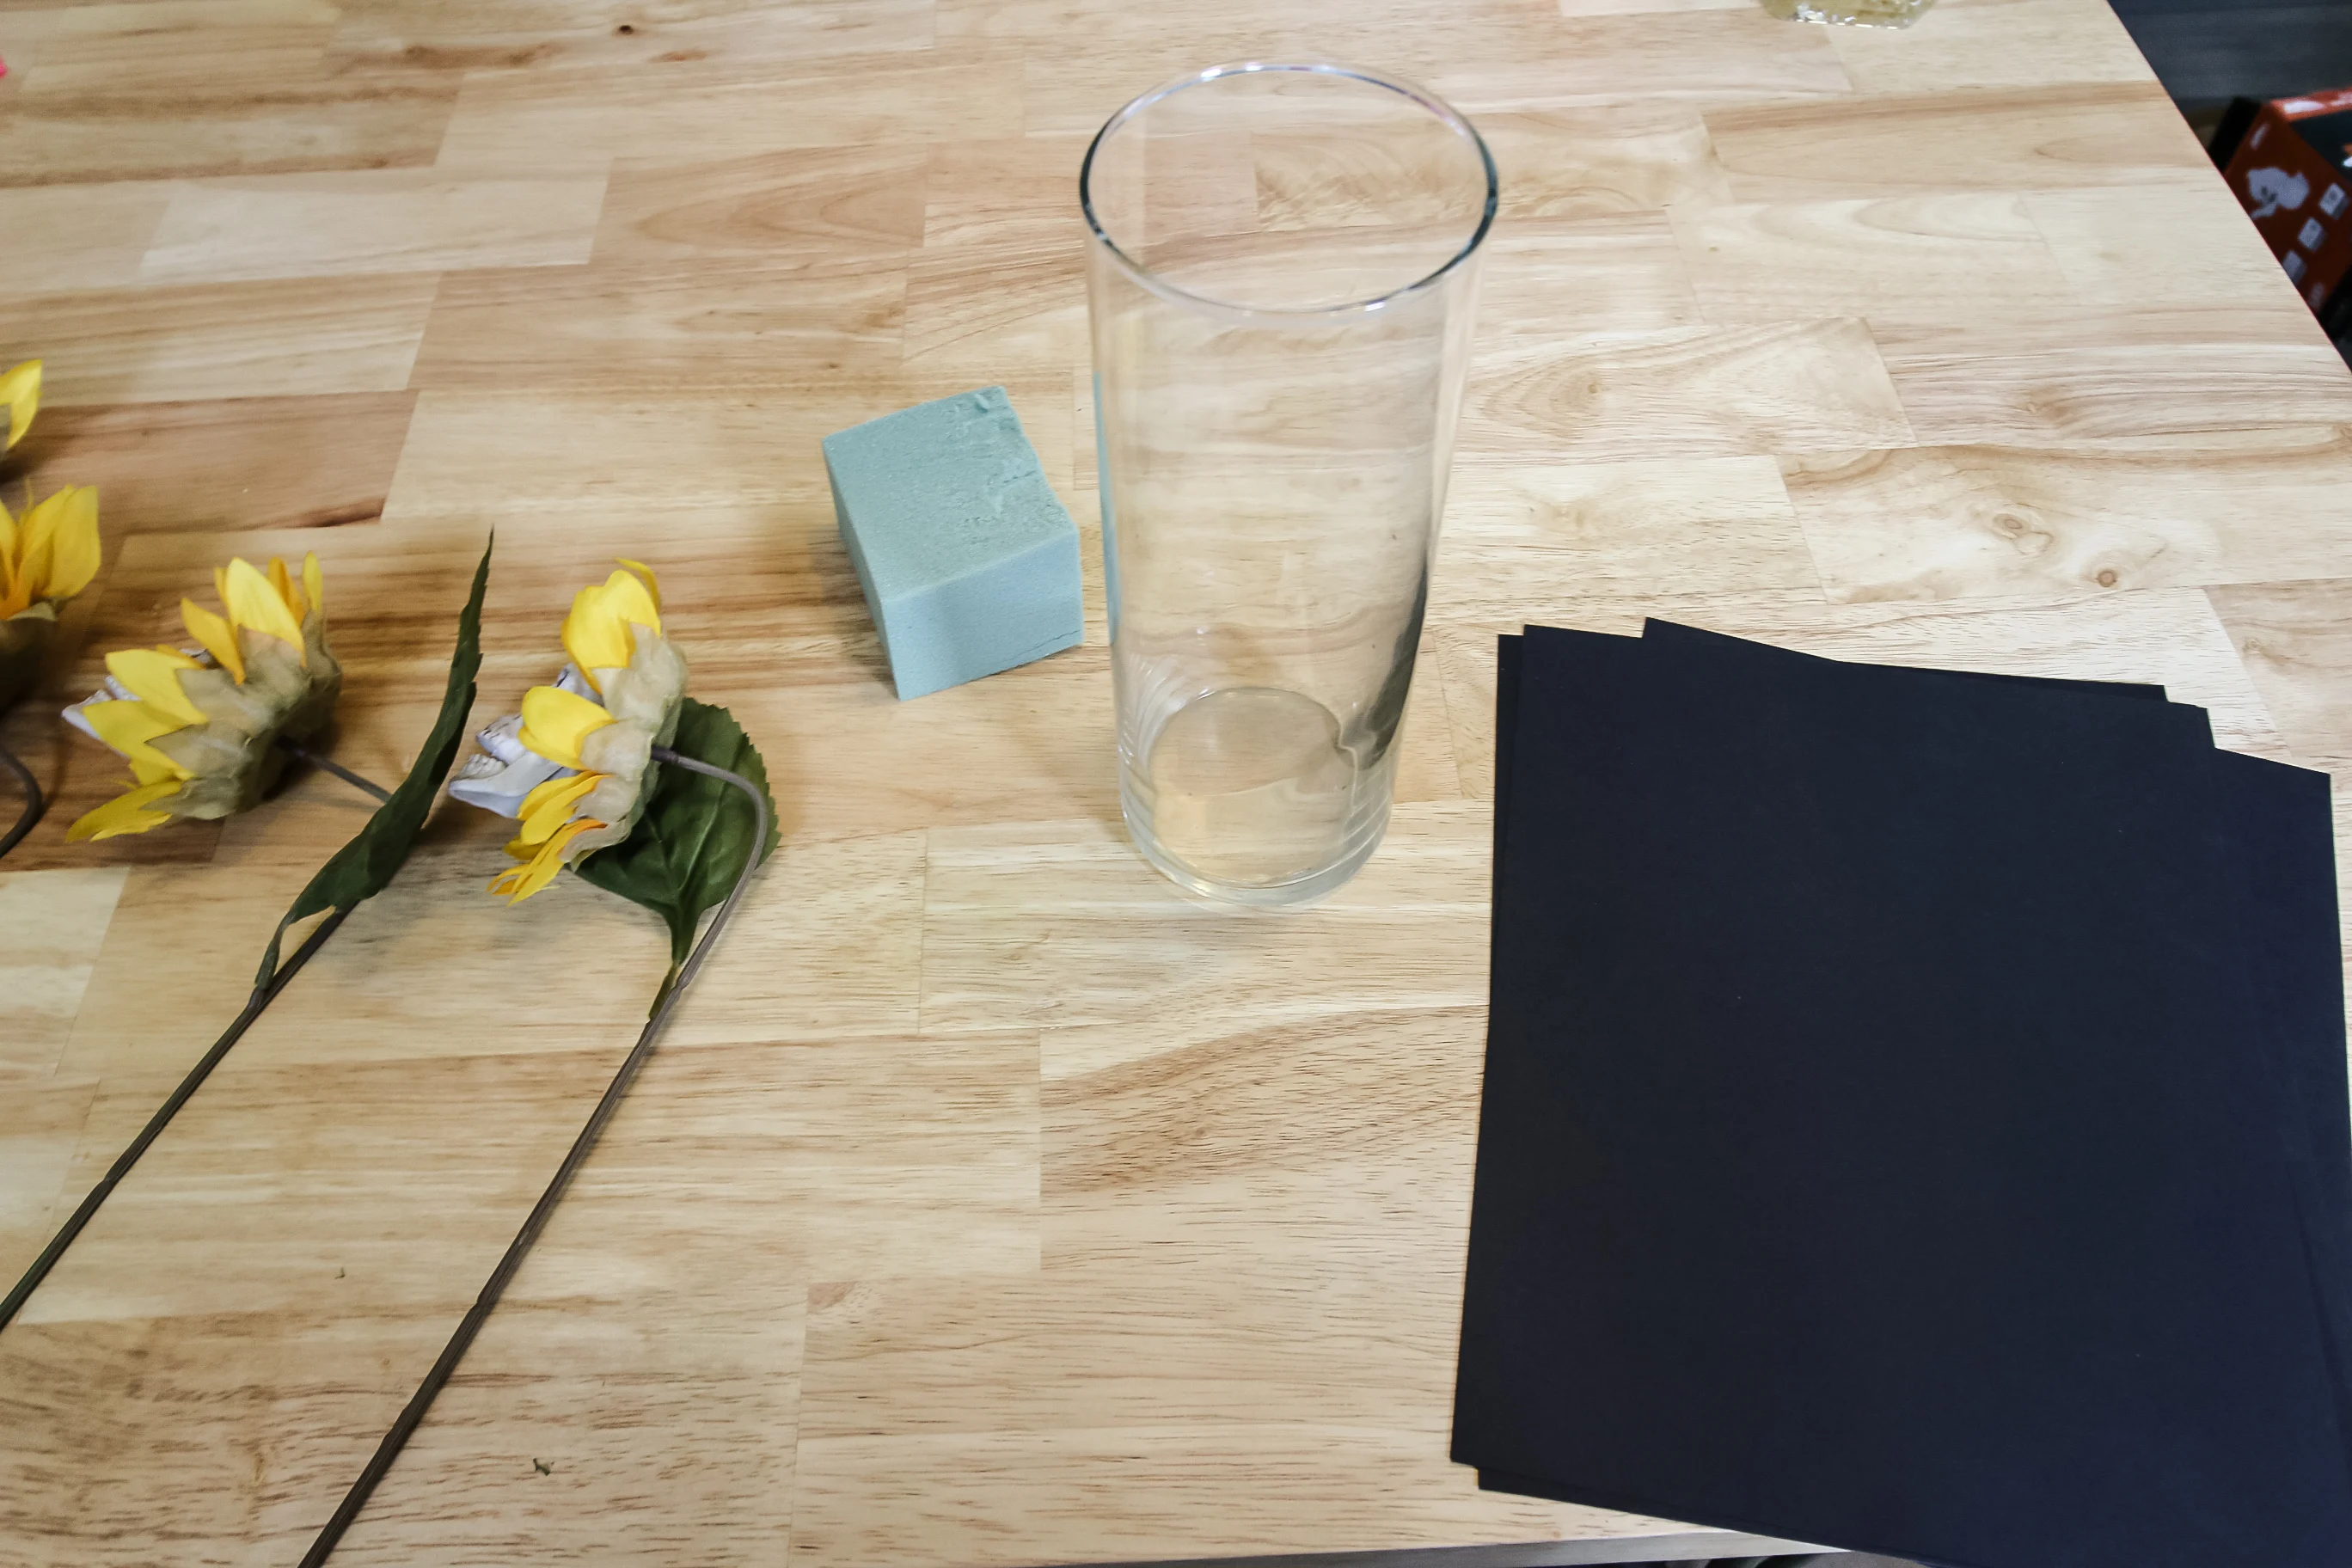 adding paper and foam to a glass vase